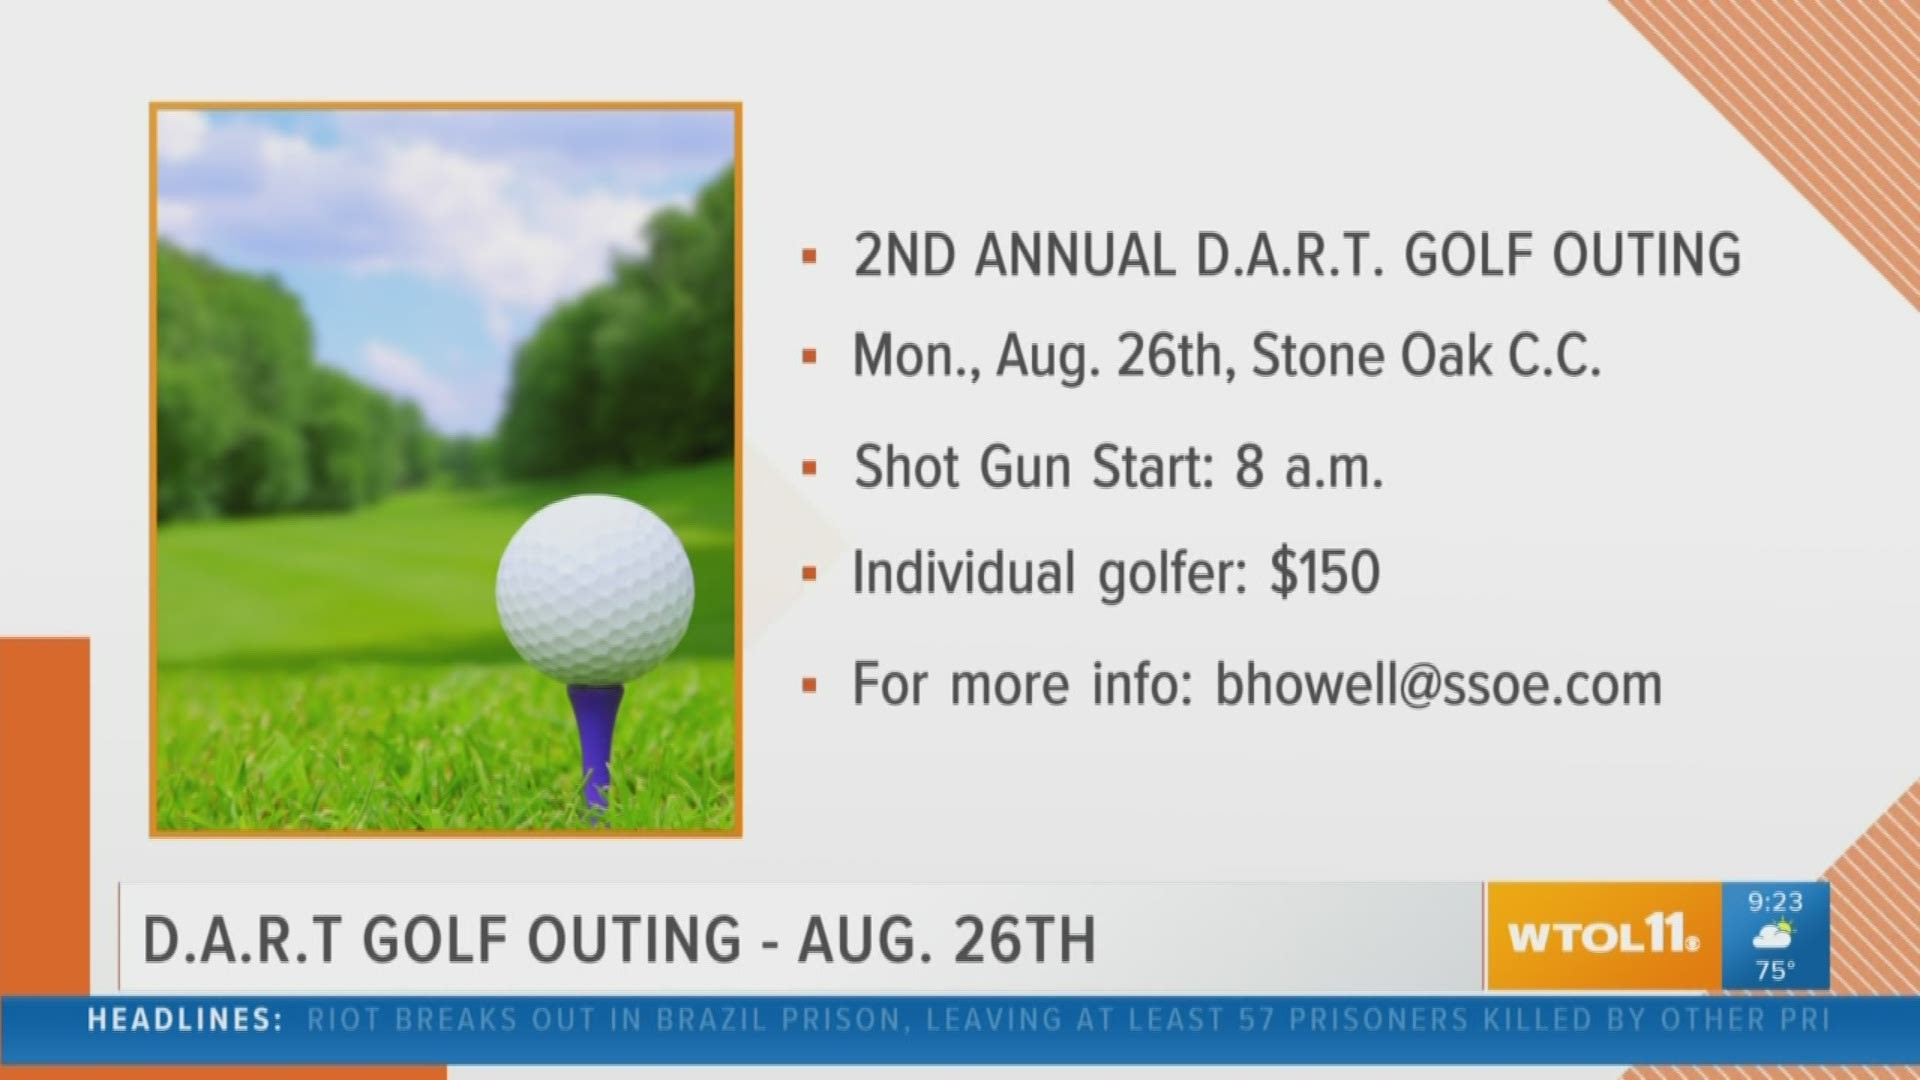 Lucas County Sheriff John Tharp invites you to the D.A.R.T golf outing coming up in August!